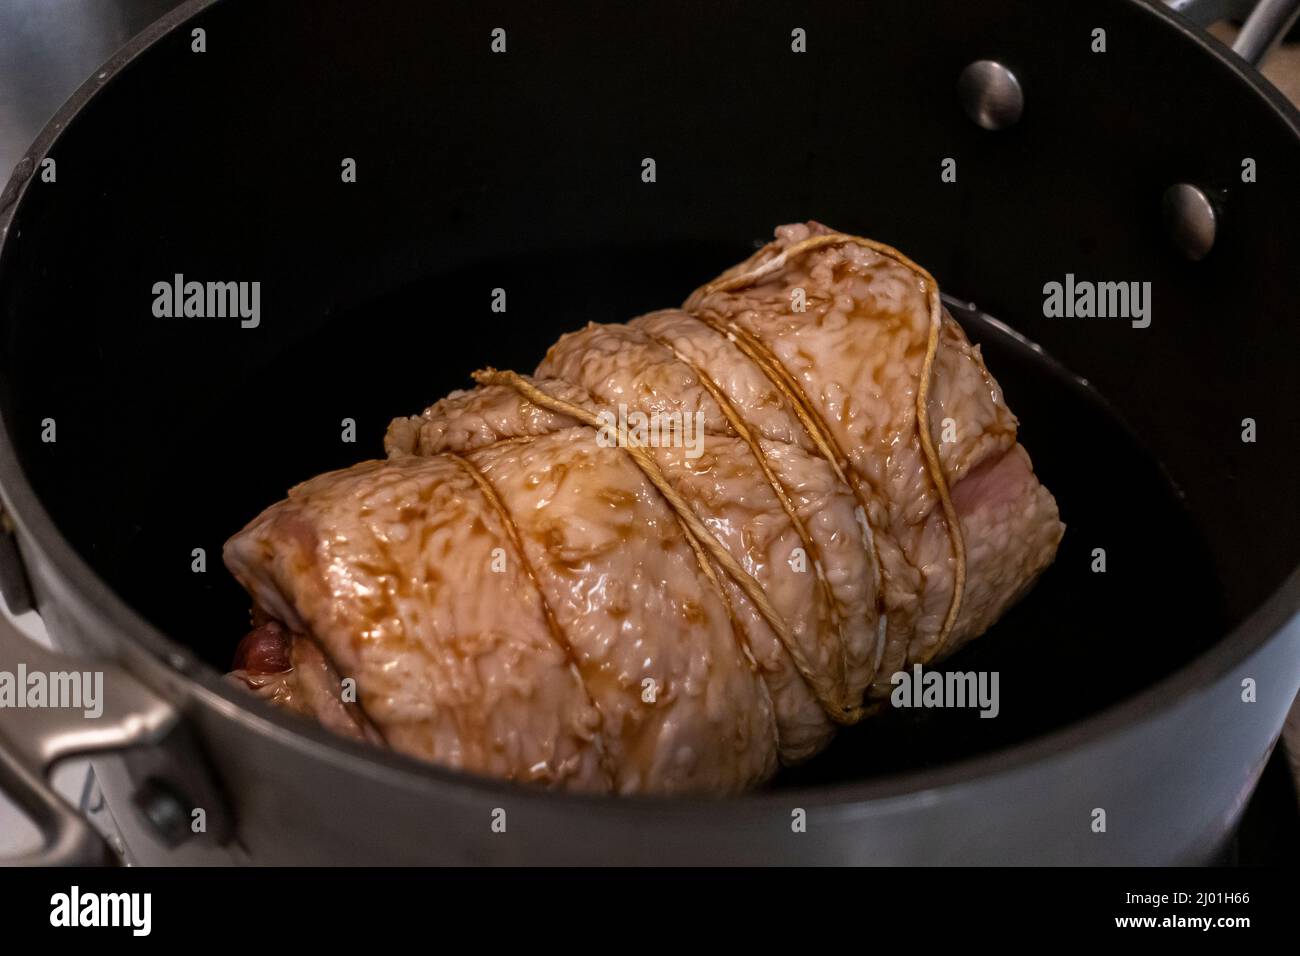 Close up, selective focus on a juicy, pork chashu roast cooking in a large pot filled with soy sauce and green onions Stock Photo